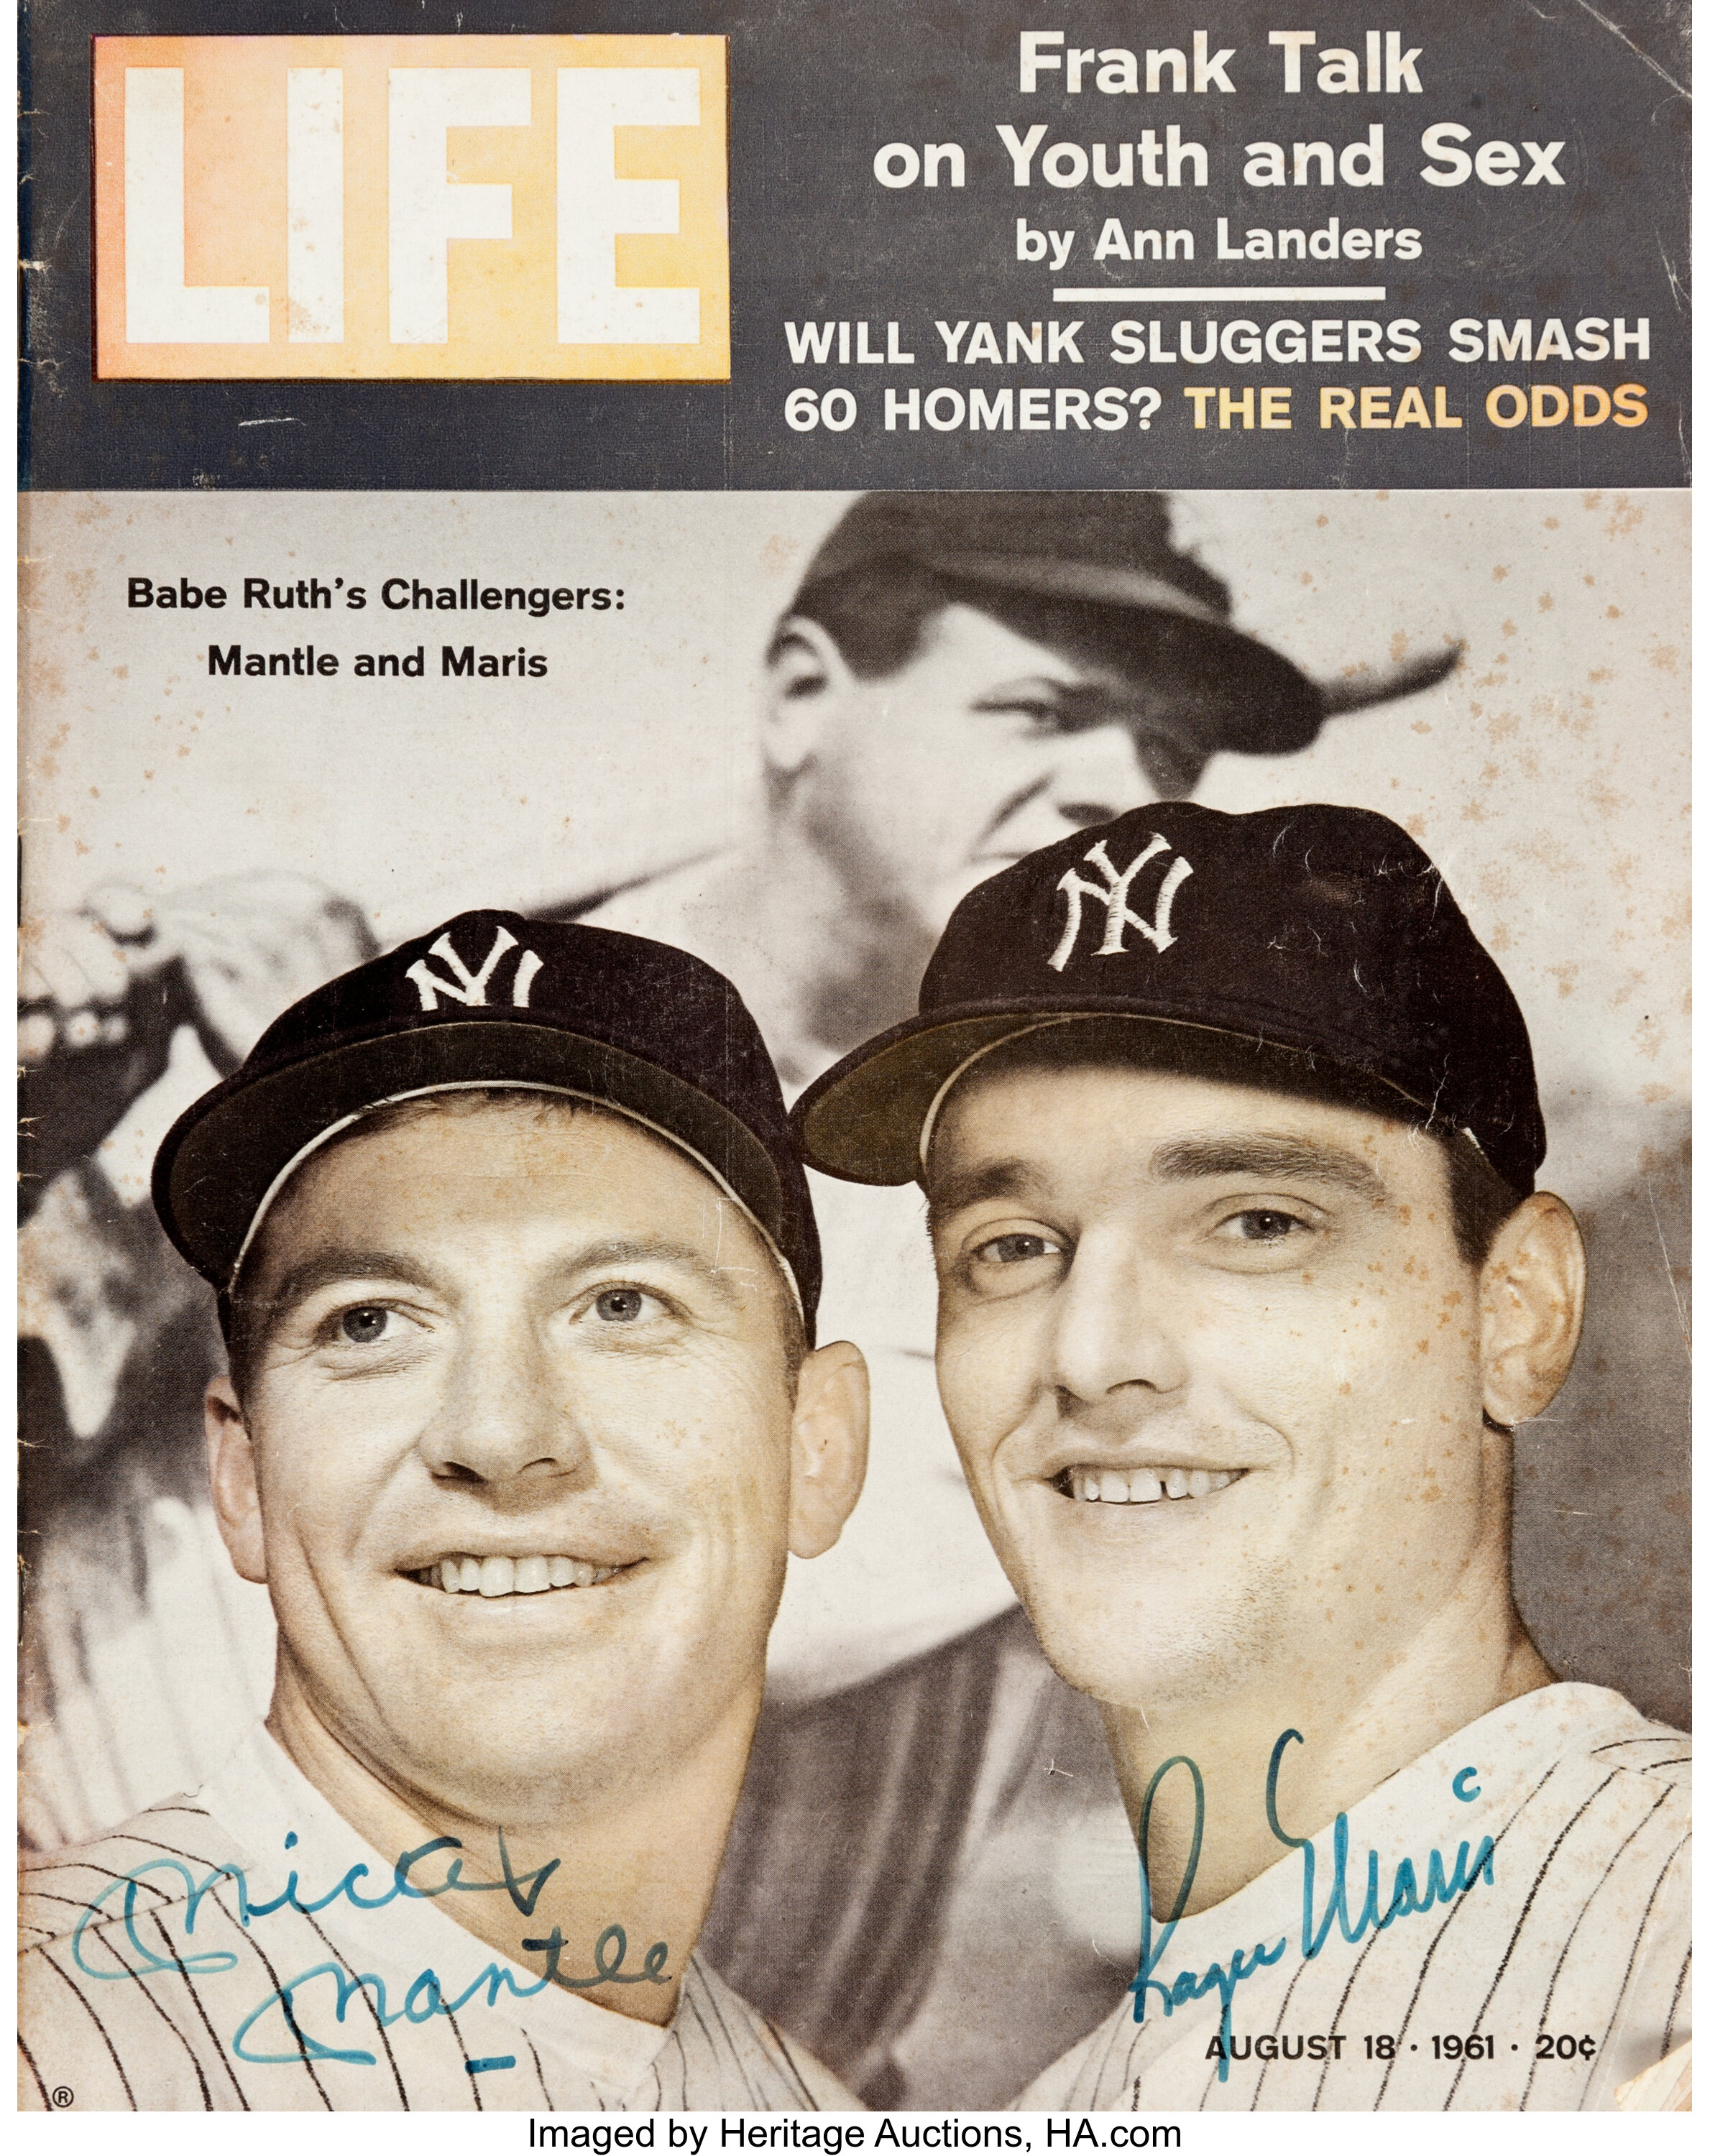 Mickey Mantle Roger Maris yankees signed 8x10 photo autograph photograph  poster print reprint